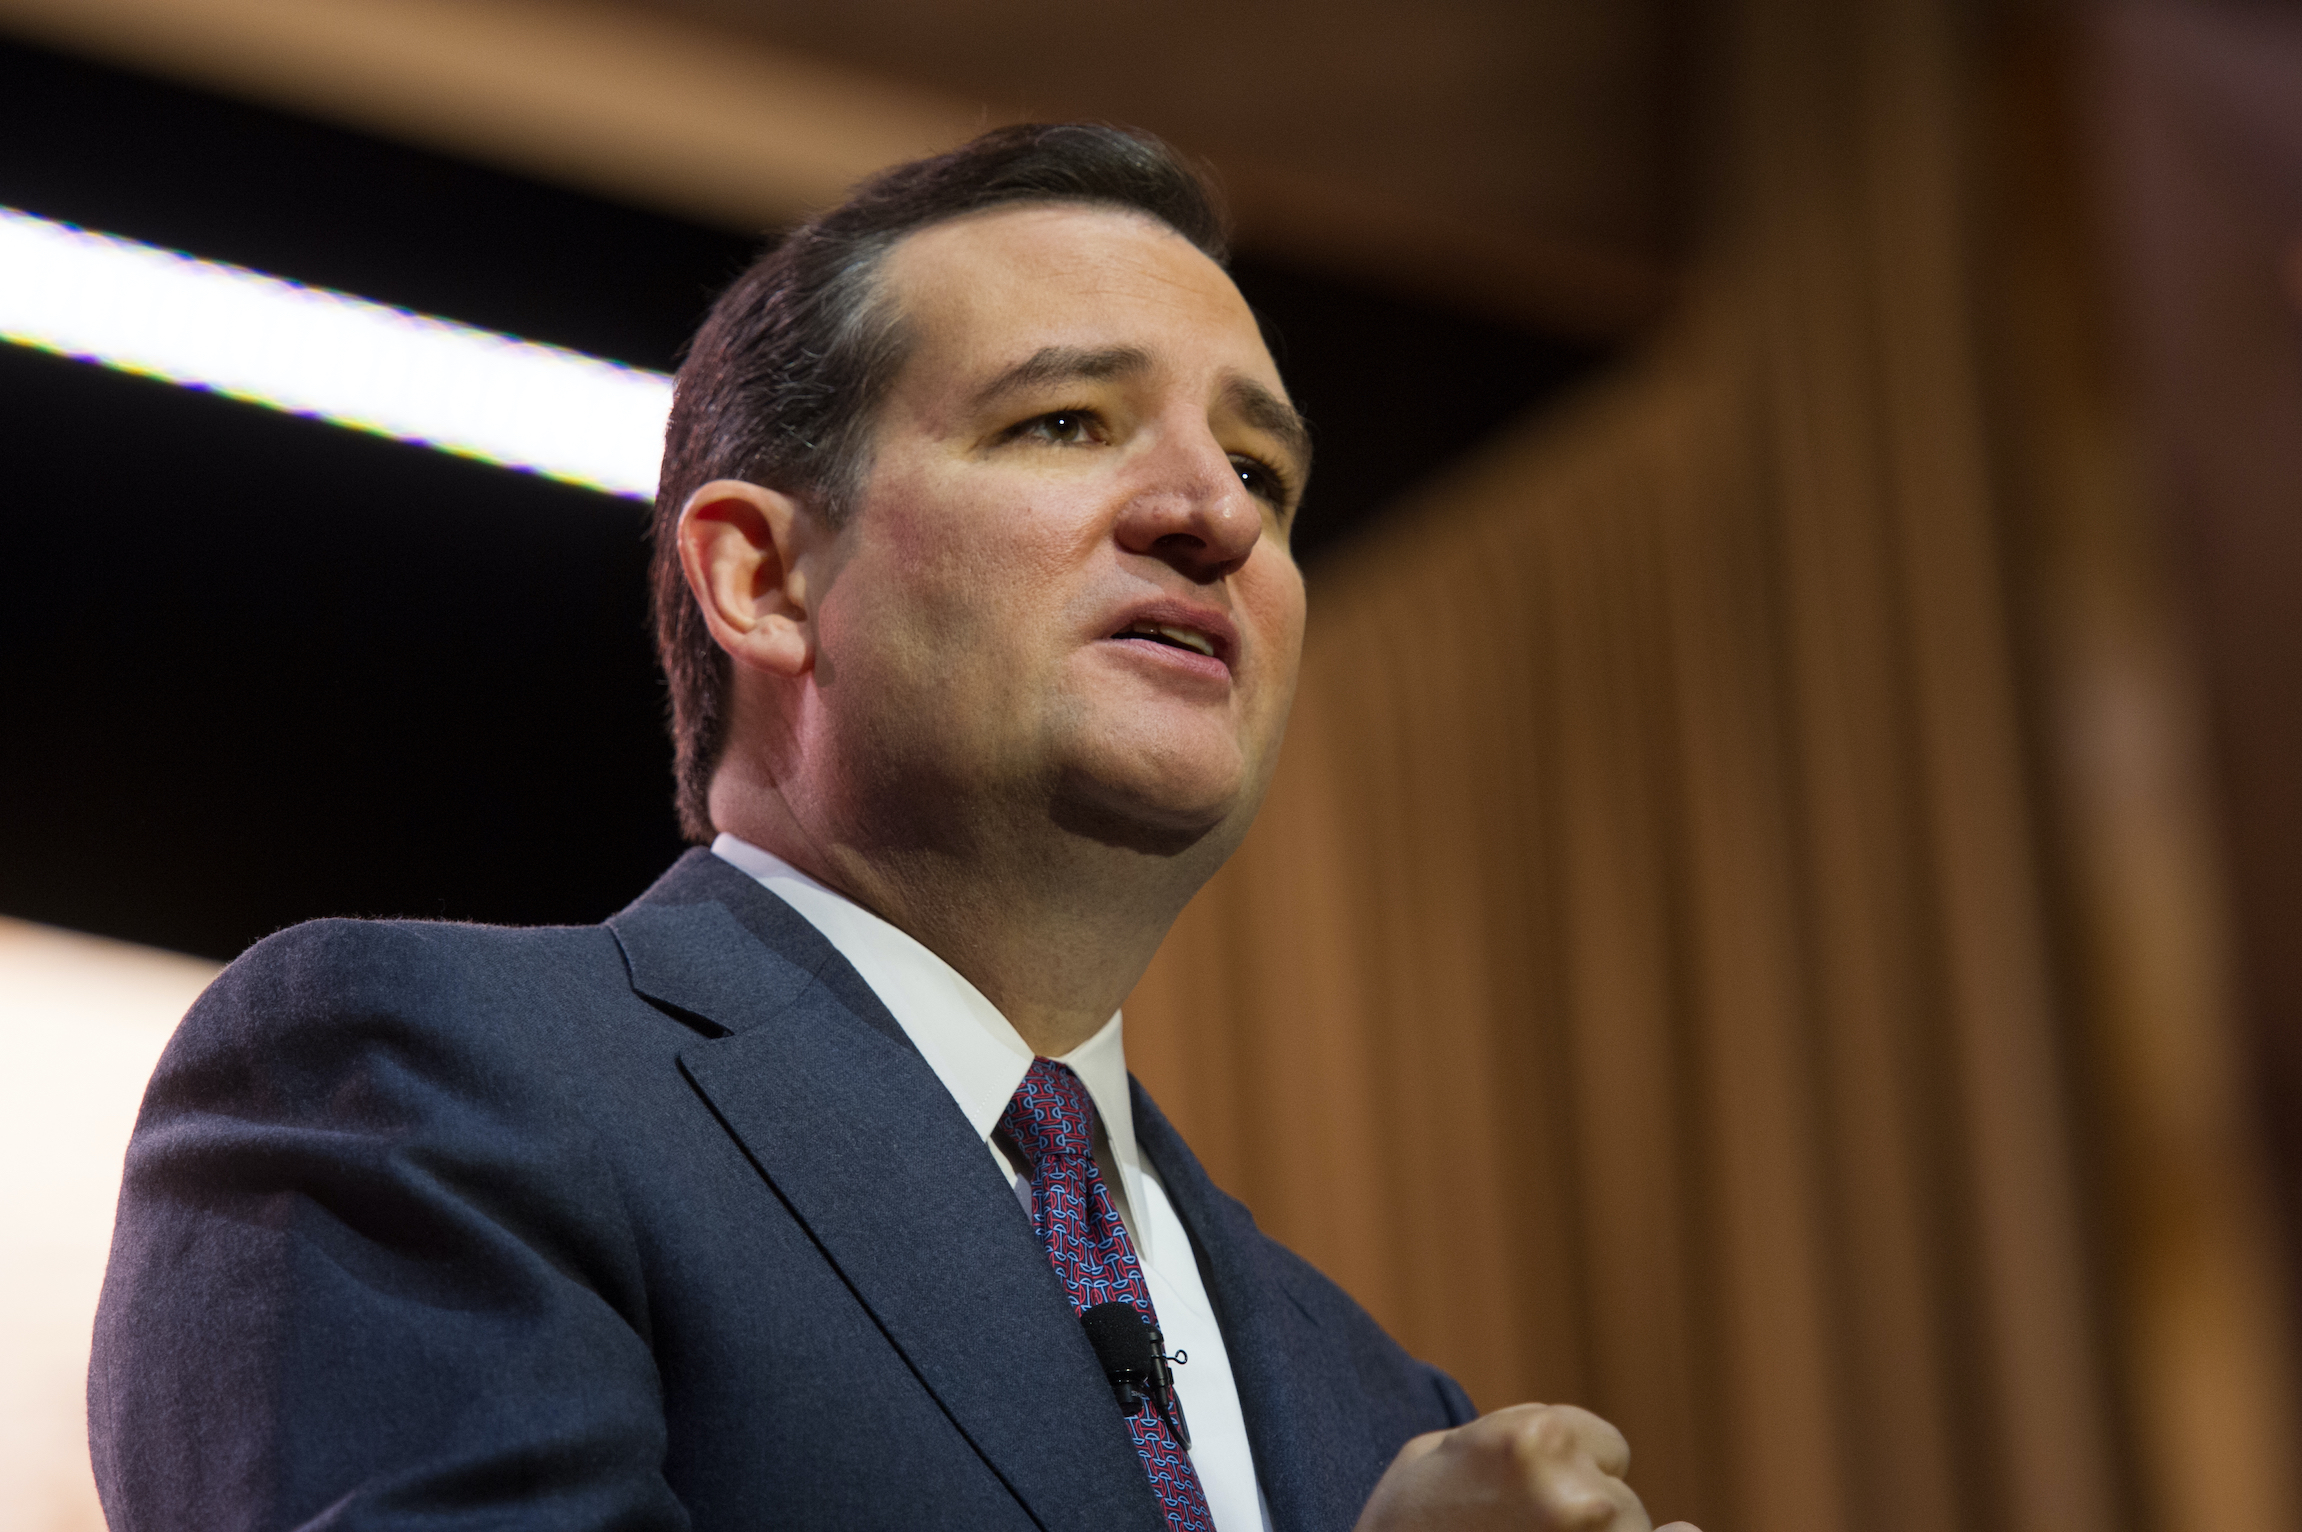 Justices will hear Ted Cruz’s challenge to loan restrictions in campaign-finance law